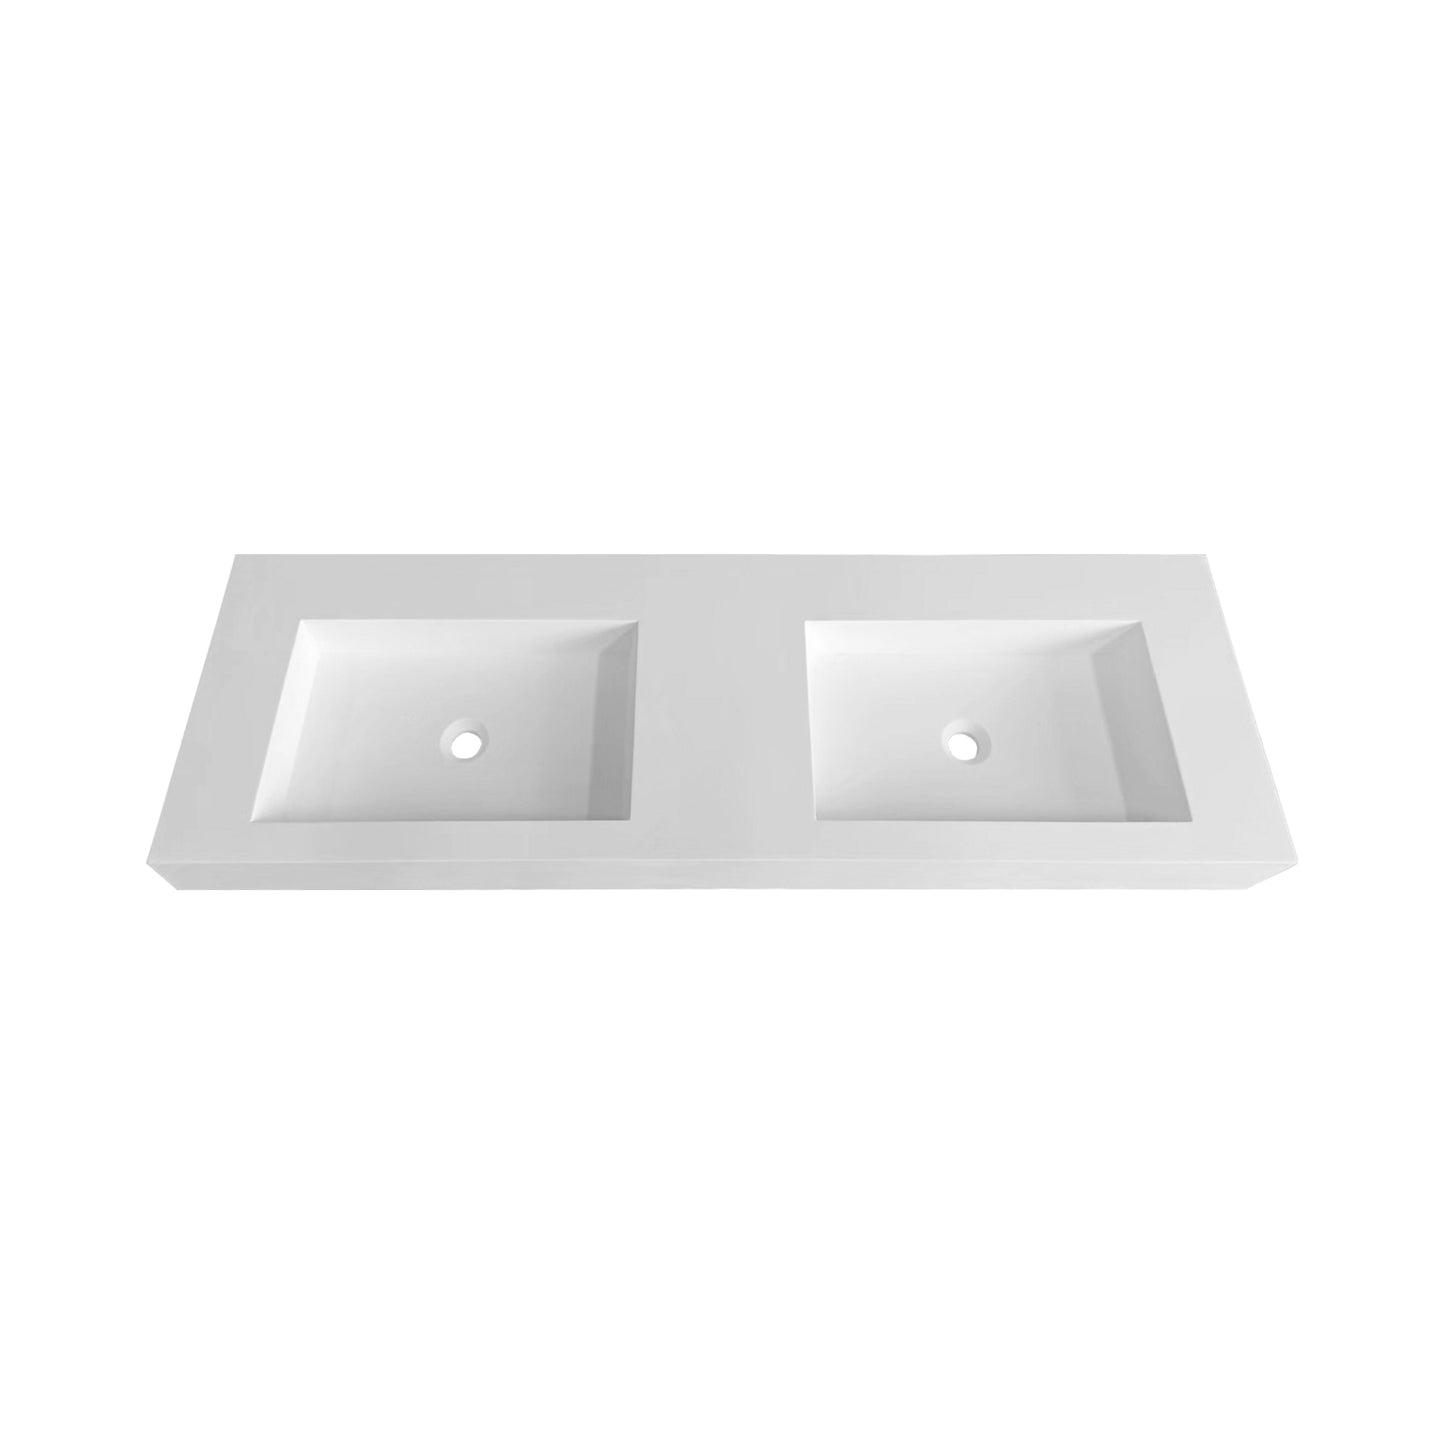 60inch Solid surface double basin including mounting fittings